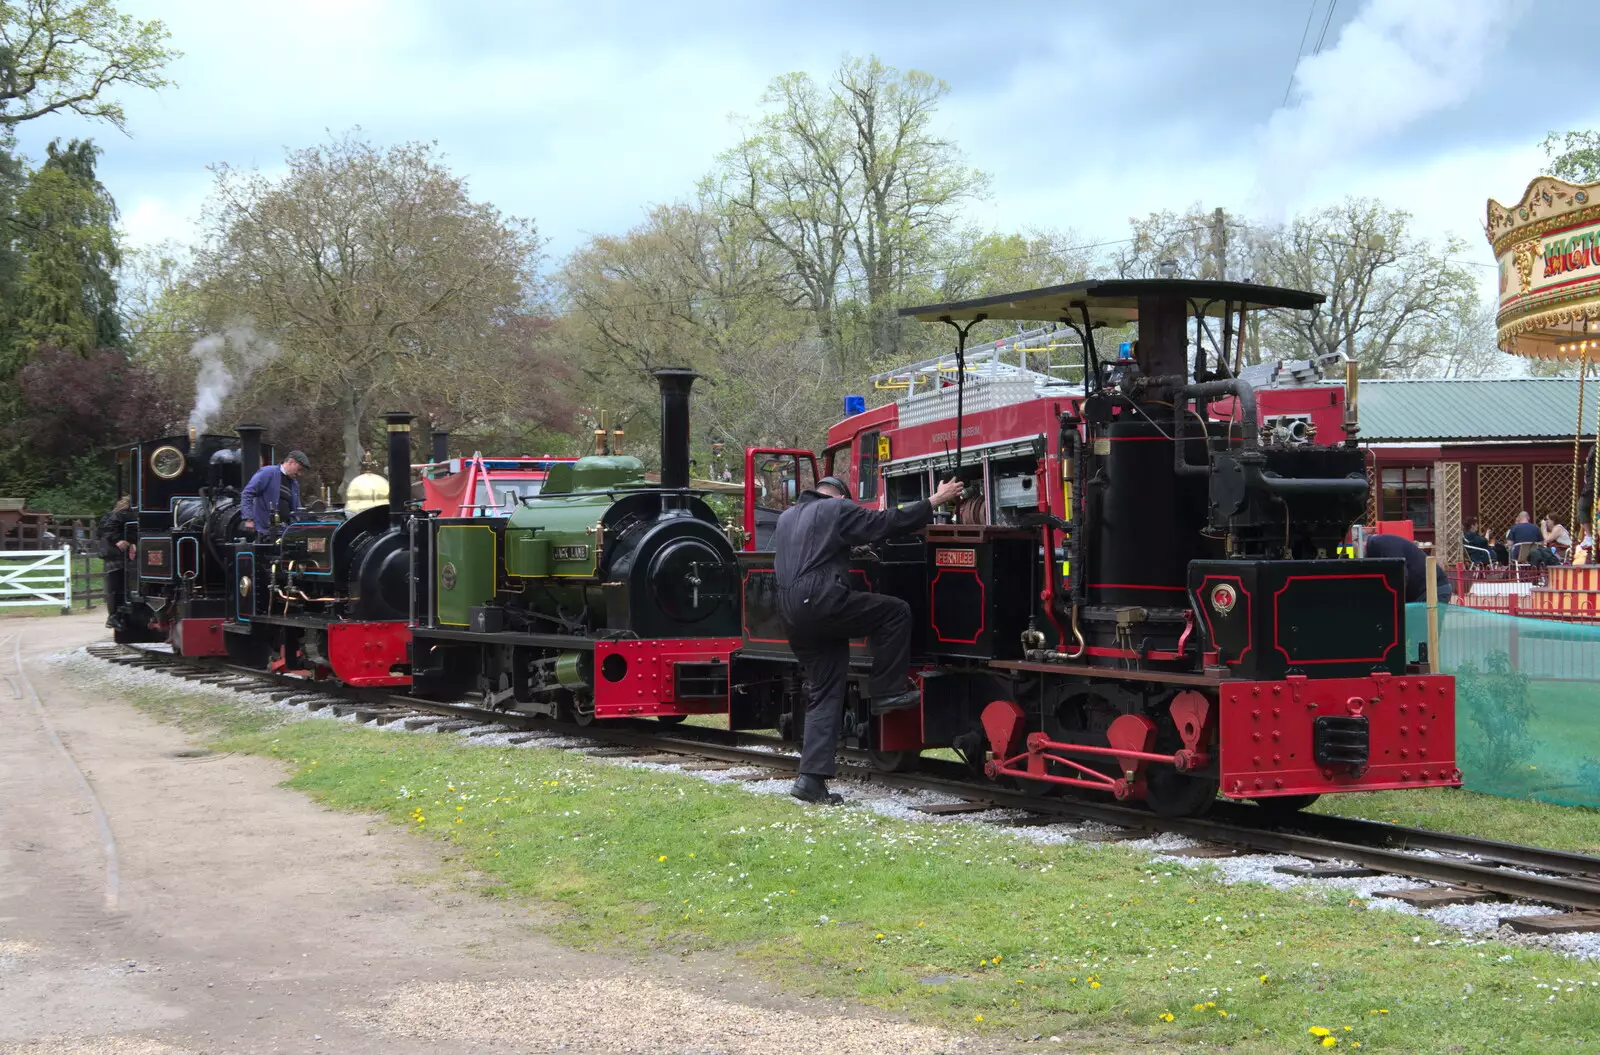 The drivers saddle up , from The Heritage Steam Gala, Bressingham Steam Museum, Norfolk - 1st May 2023